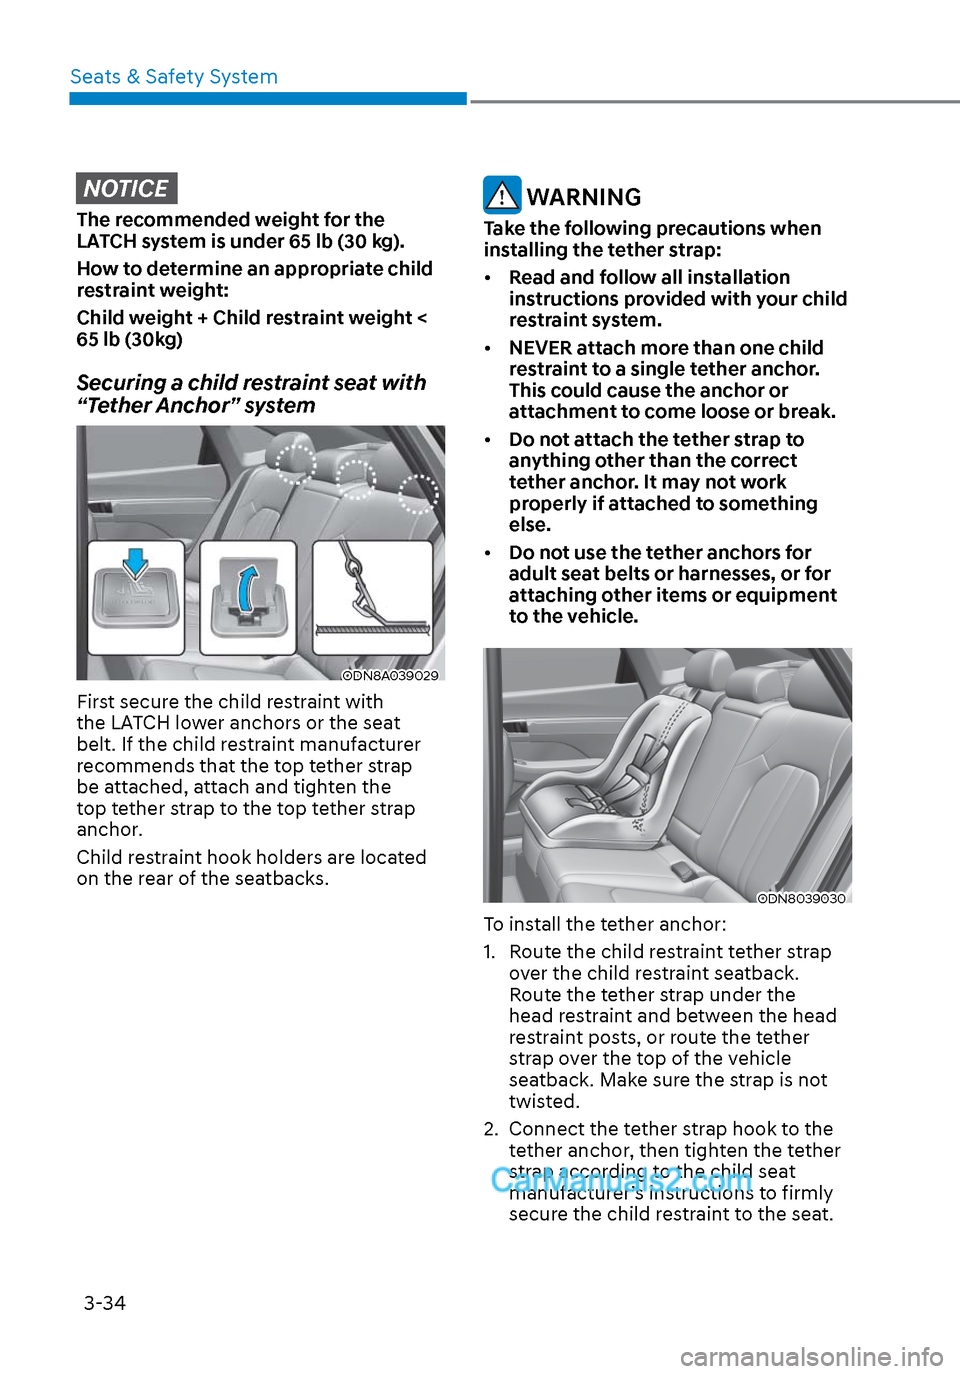 Hyundai Sonata 2020  Owners Manual Seats & Safety System3-34
NOTICE
The recommended weight for the 
LATCH system is under 65 lb (30 kg).
How to determine an appropriate child 
restraint weight:
Child weight + Child restraint weight < 
